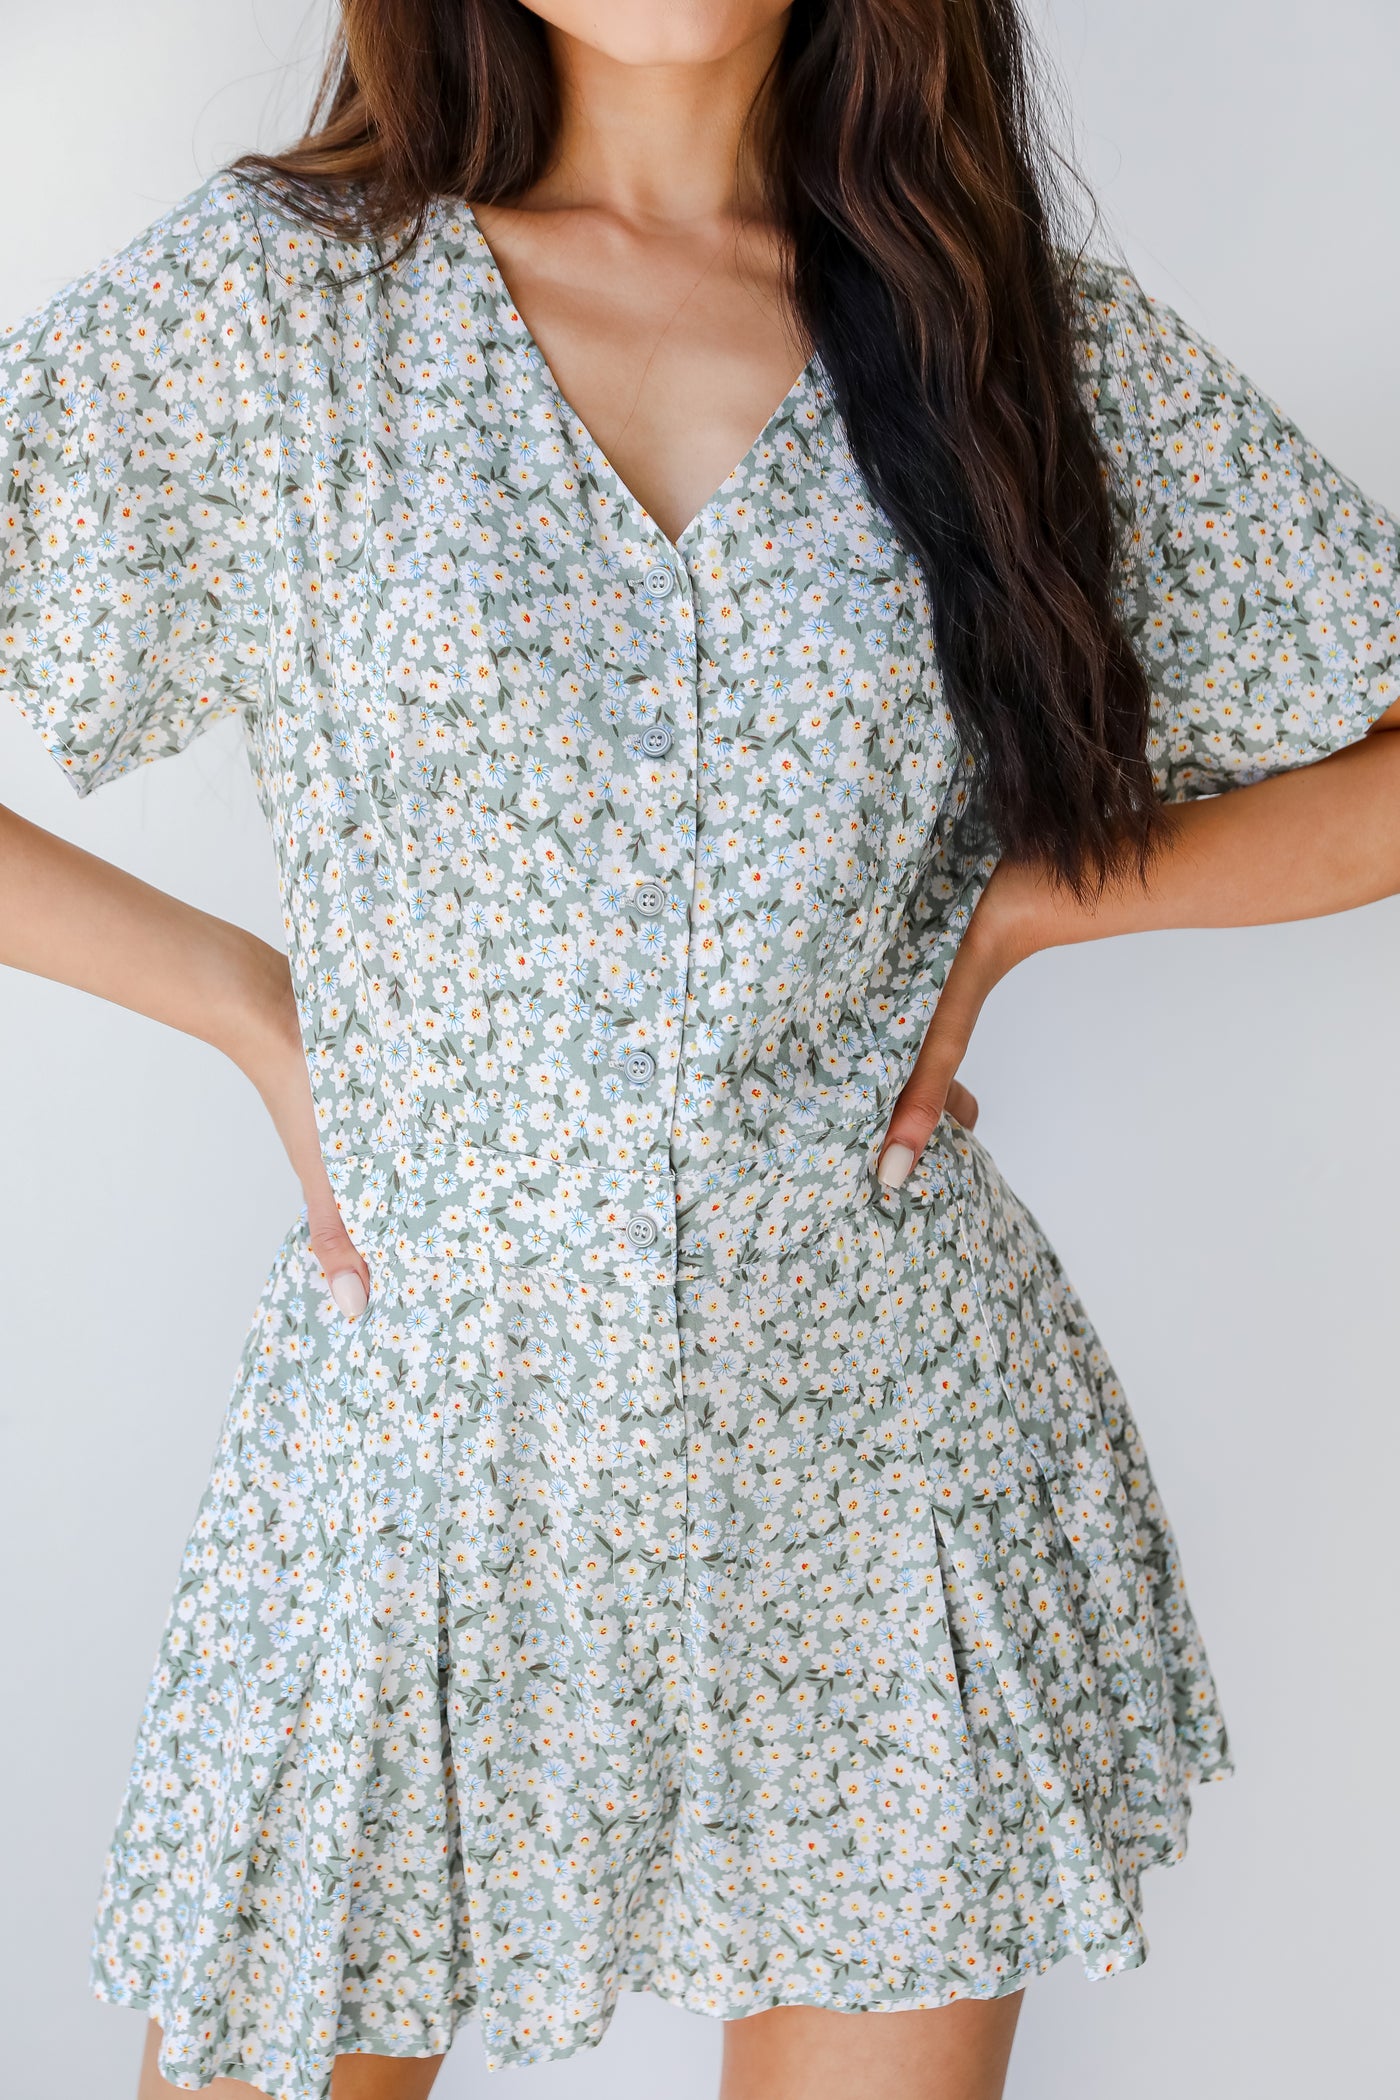 Floral Romper from dress up